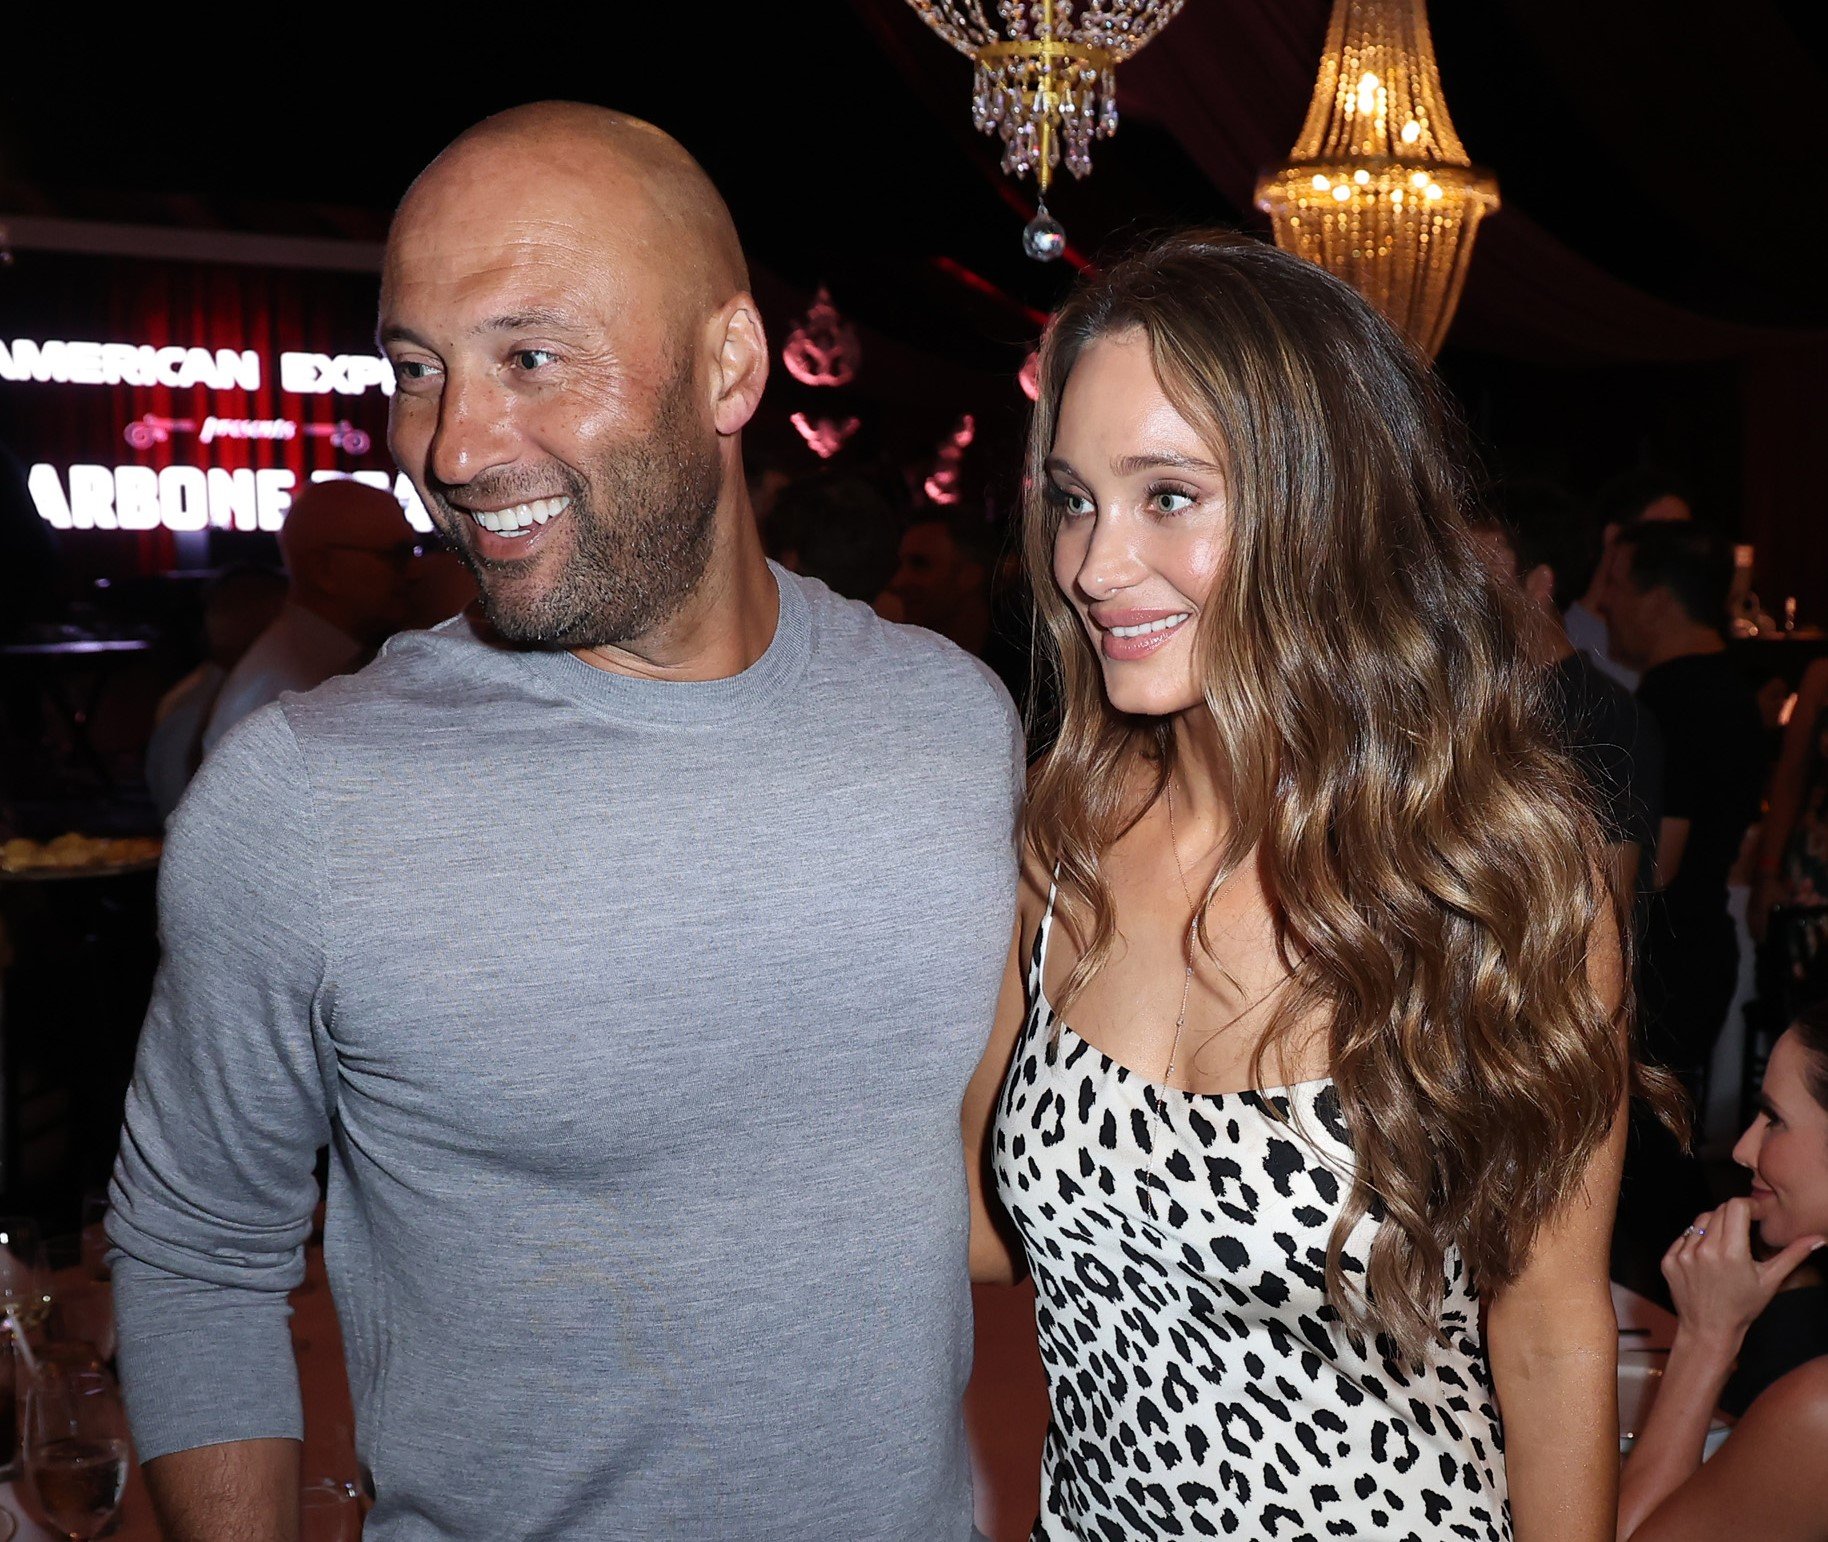 Derek Jeter And Hannah Davis Jeter Who Has A Her Own Impressive Net Worth Attend American Express Presents CARBONE Beach In Miami 